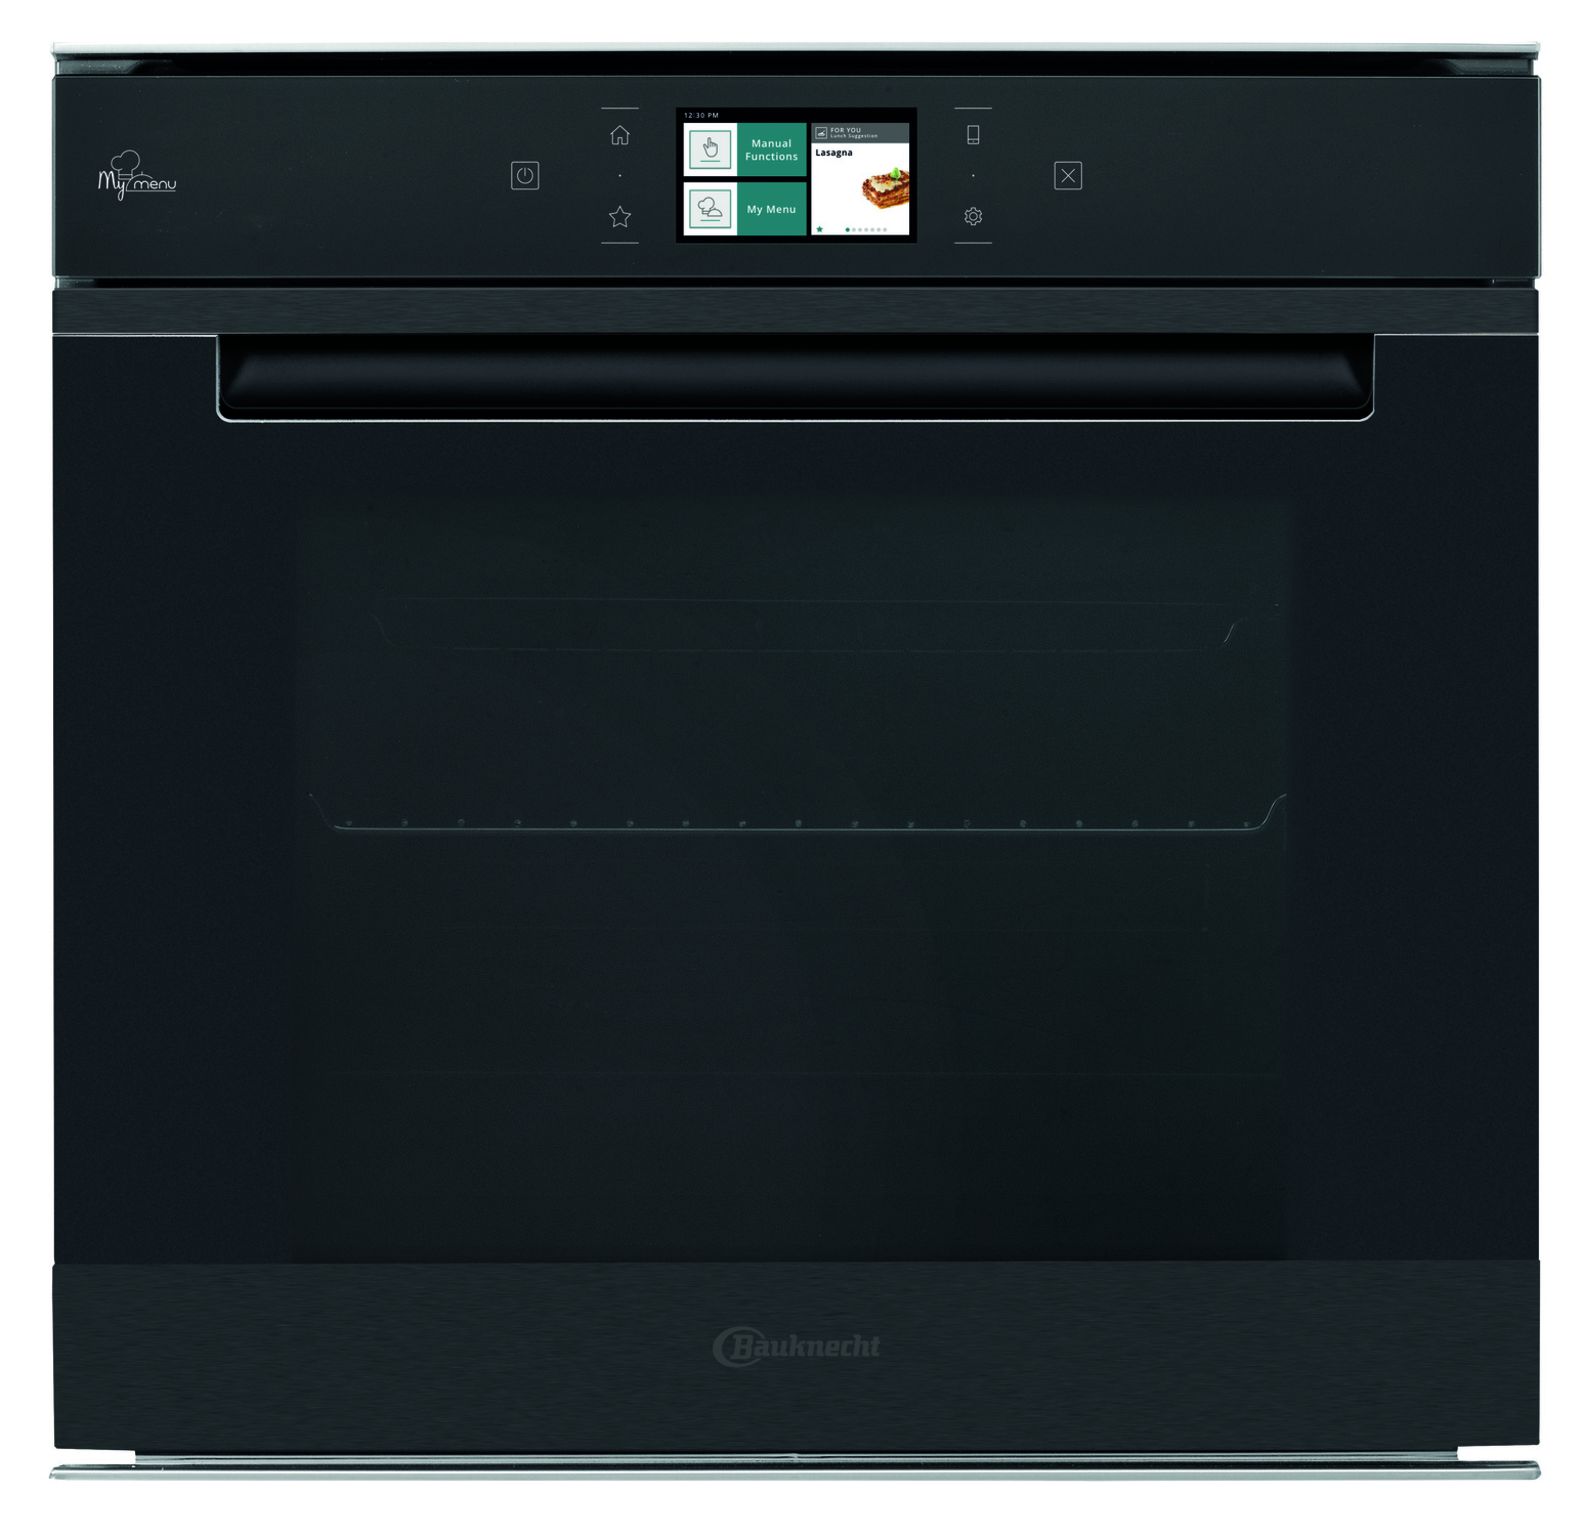 Bauknecht Class 11| Pure Steam Oven with 4 Points Probe